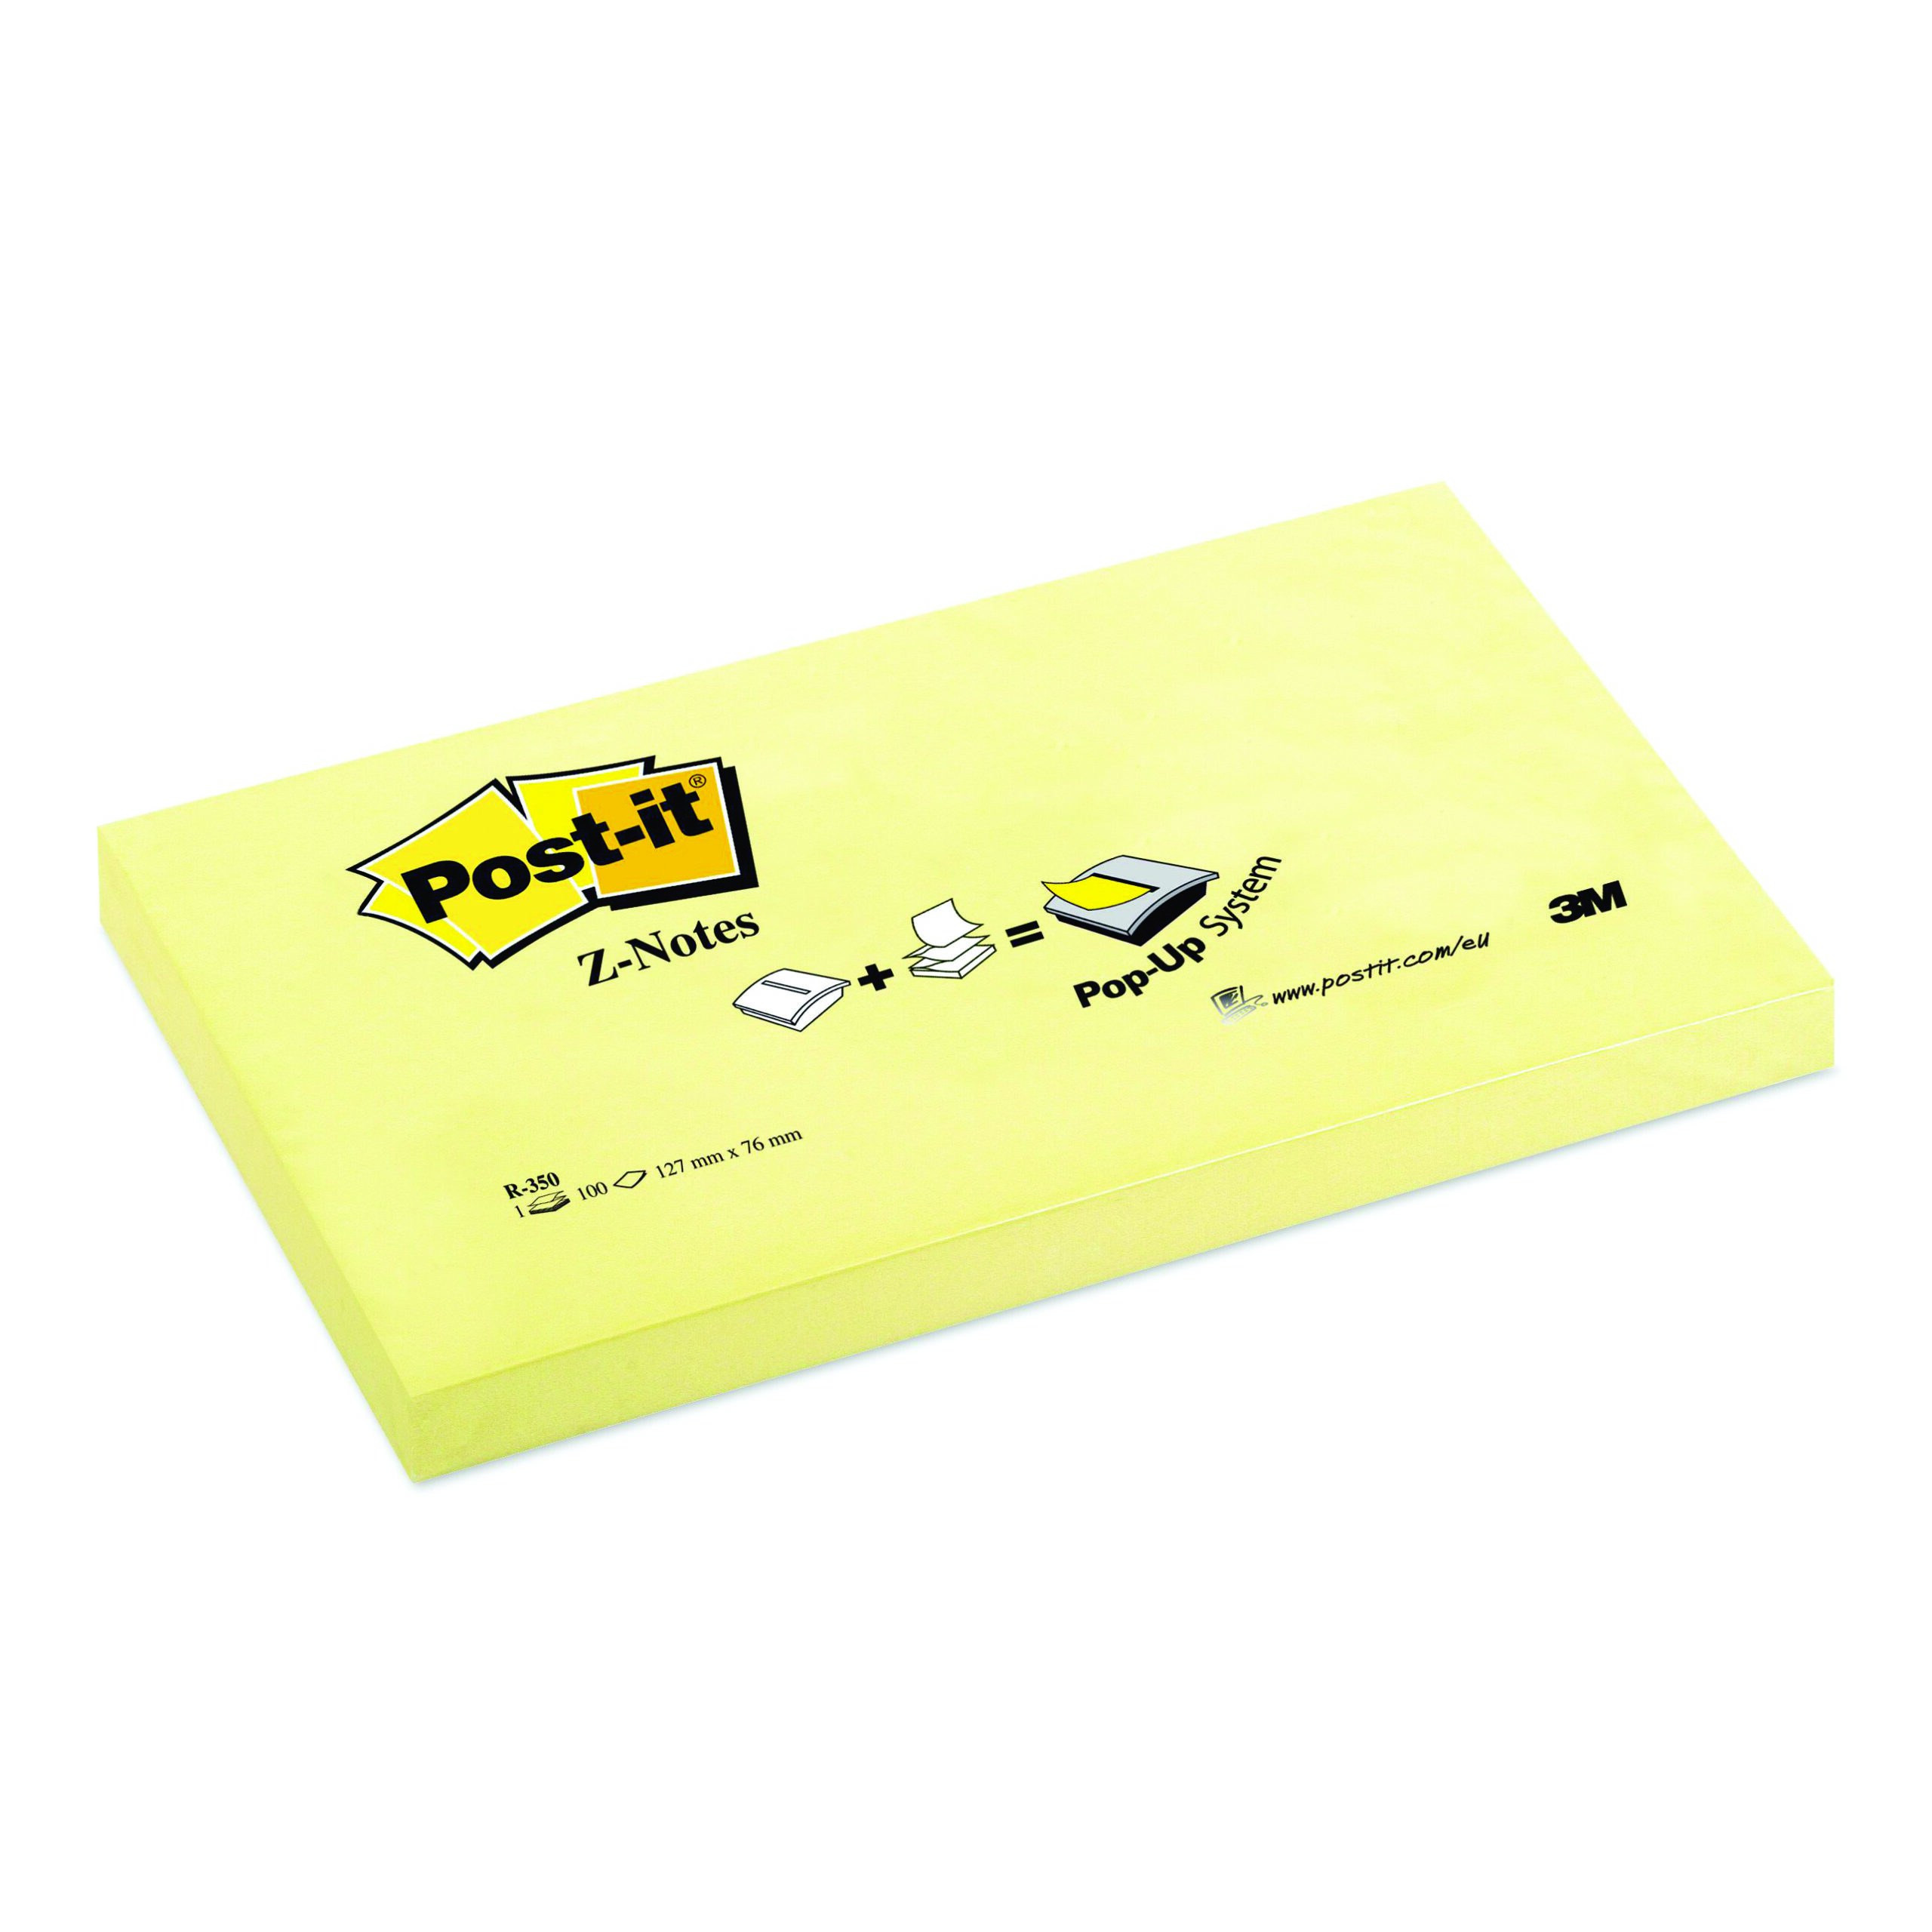 Blocco 100fg Post It Super Sticky Z Notes R350 Giallo Canary 76x127mm 7100090814 3134375014281